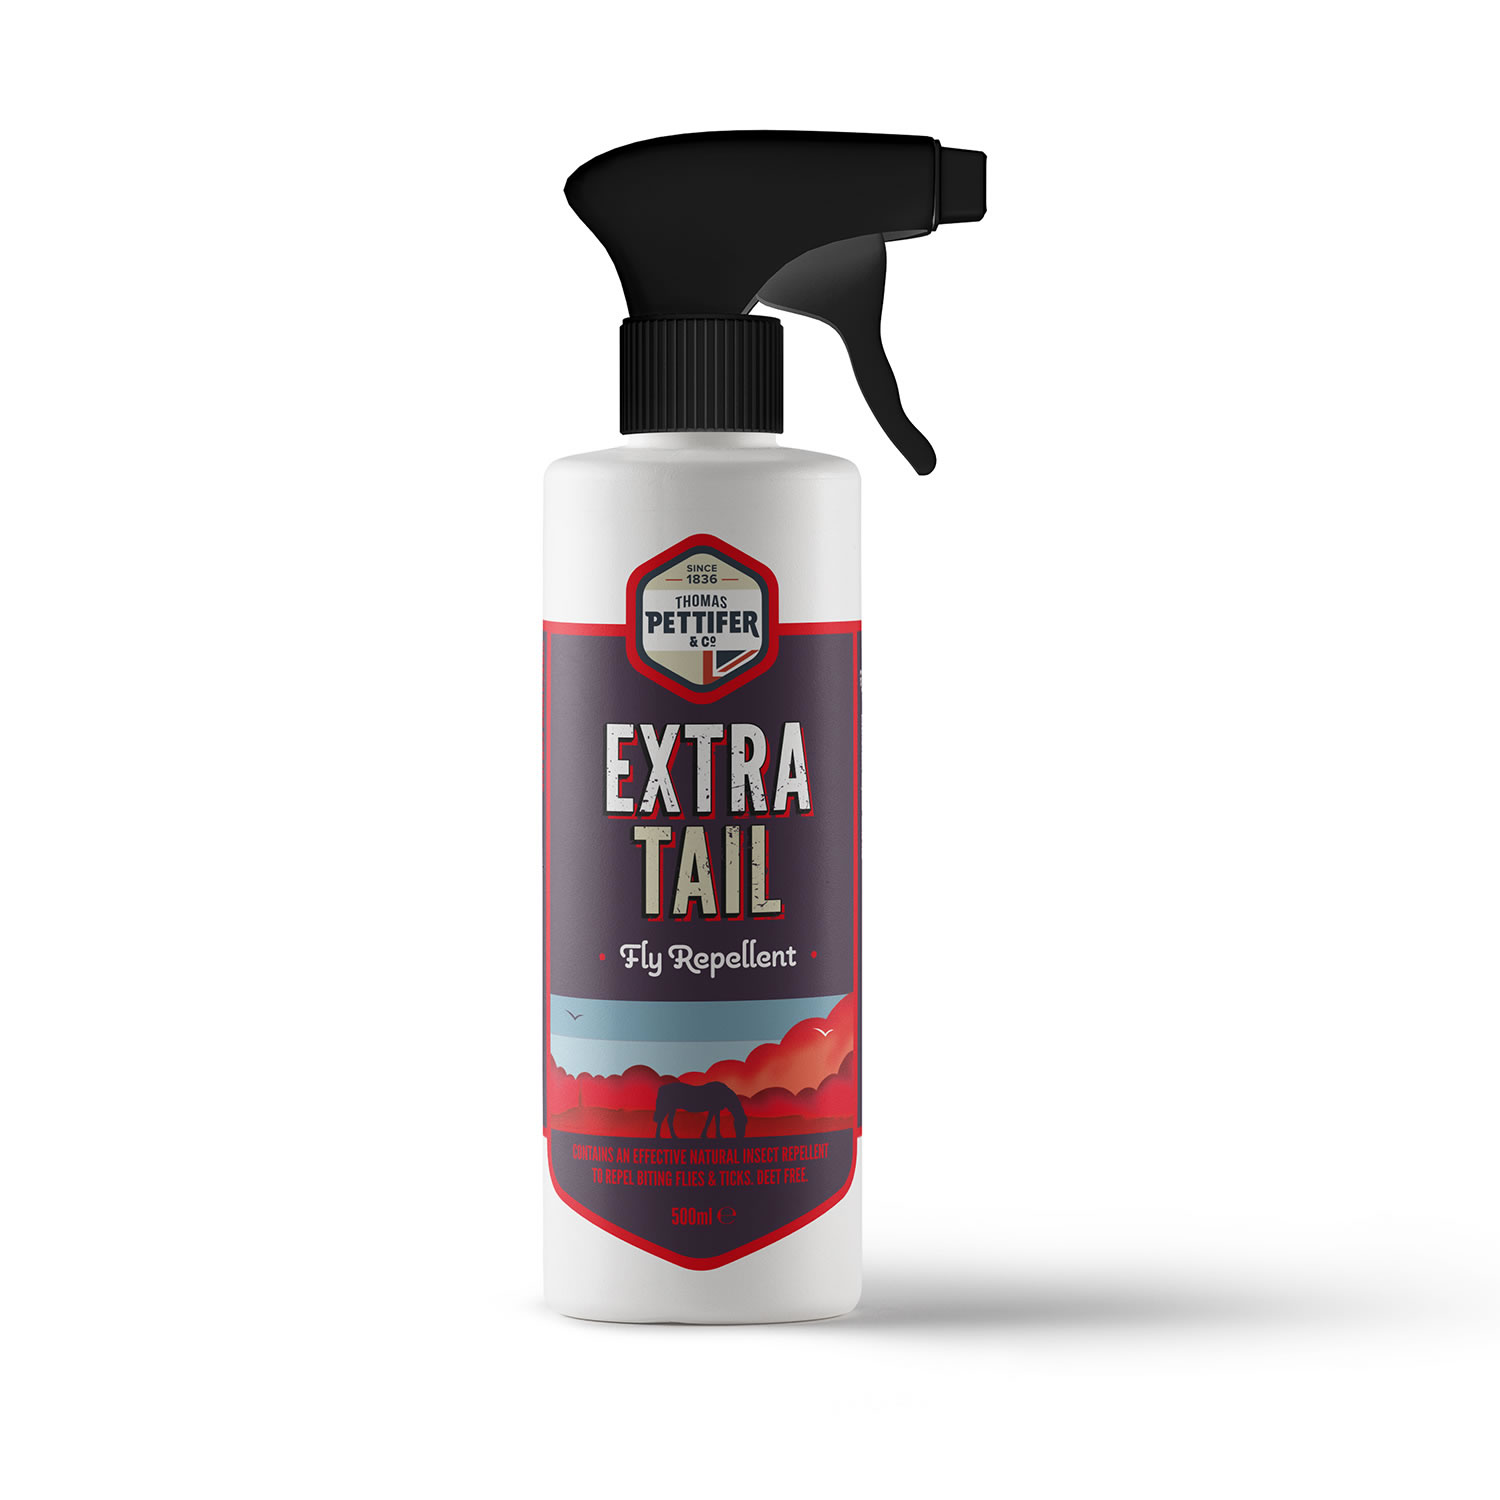 THOMAS PETTIFER EXTRA TAIL FLY REPELLENT 500 ML 500 ML